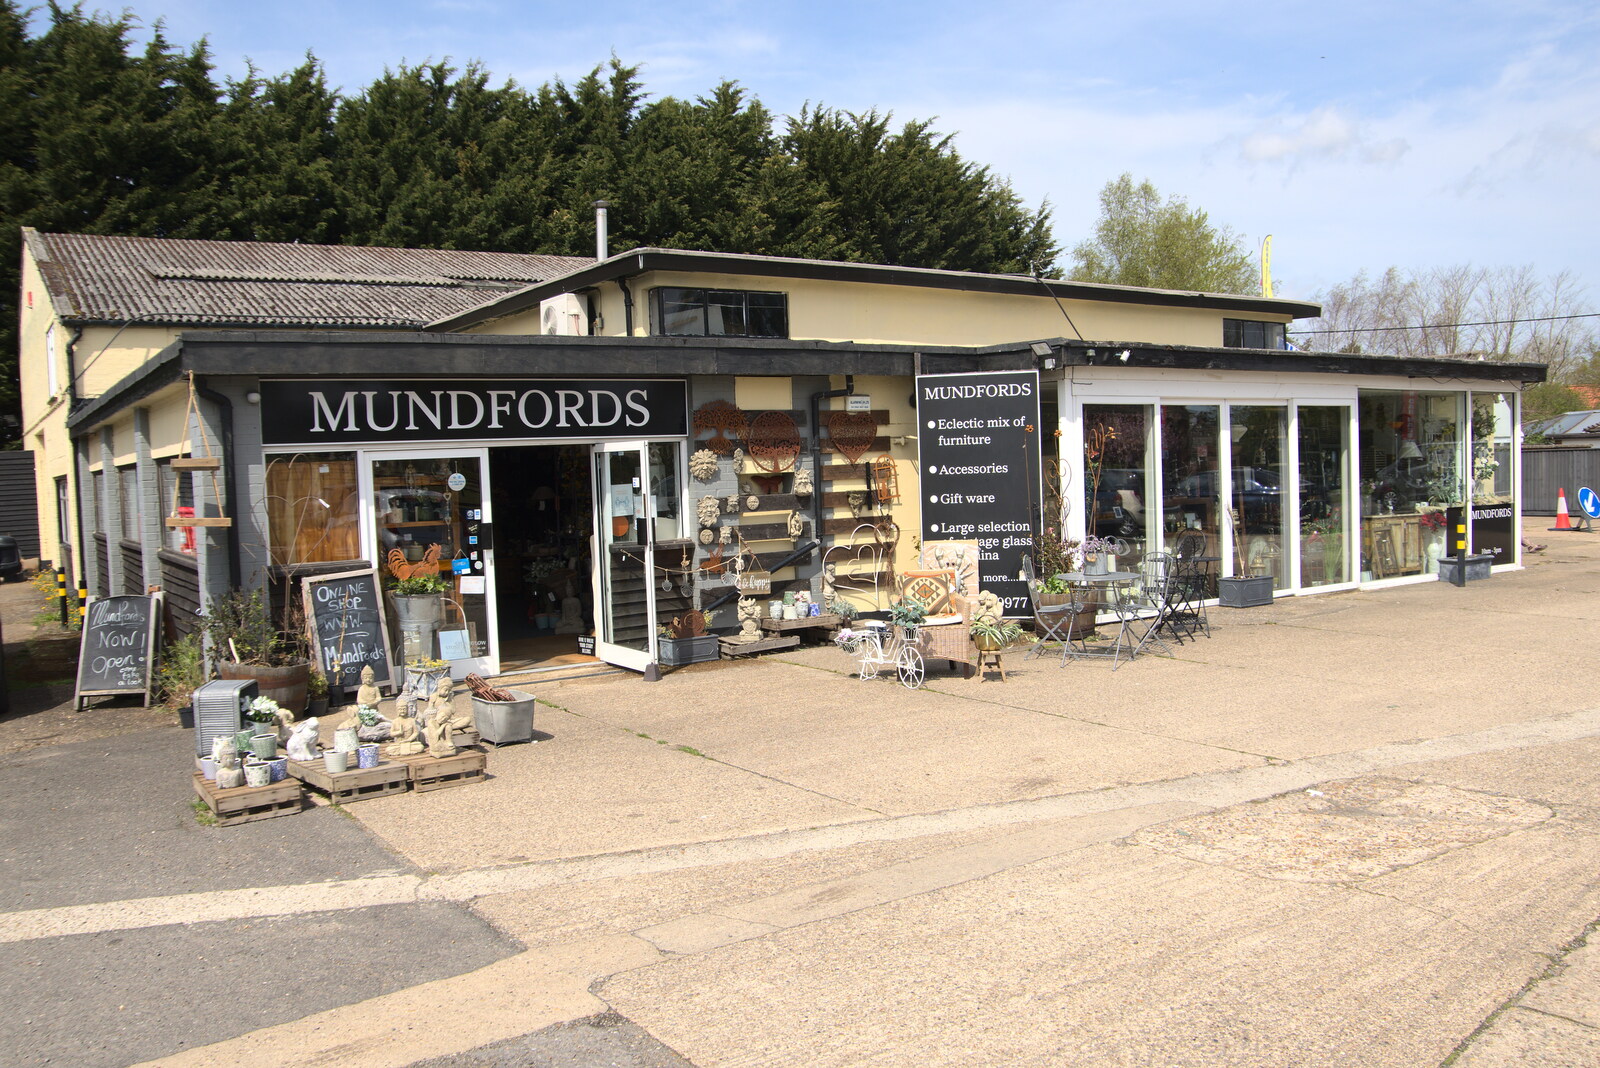 Mundford's shop on the Mundford roundabout from A Vaccination Afternoon, Swaffham, Norfolk - 9th May 2021